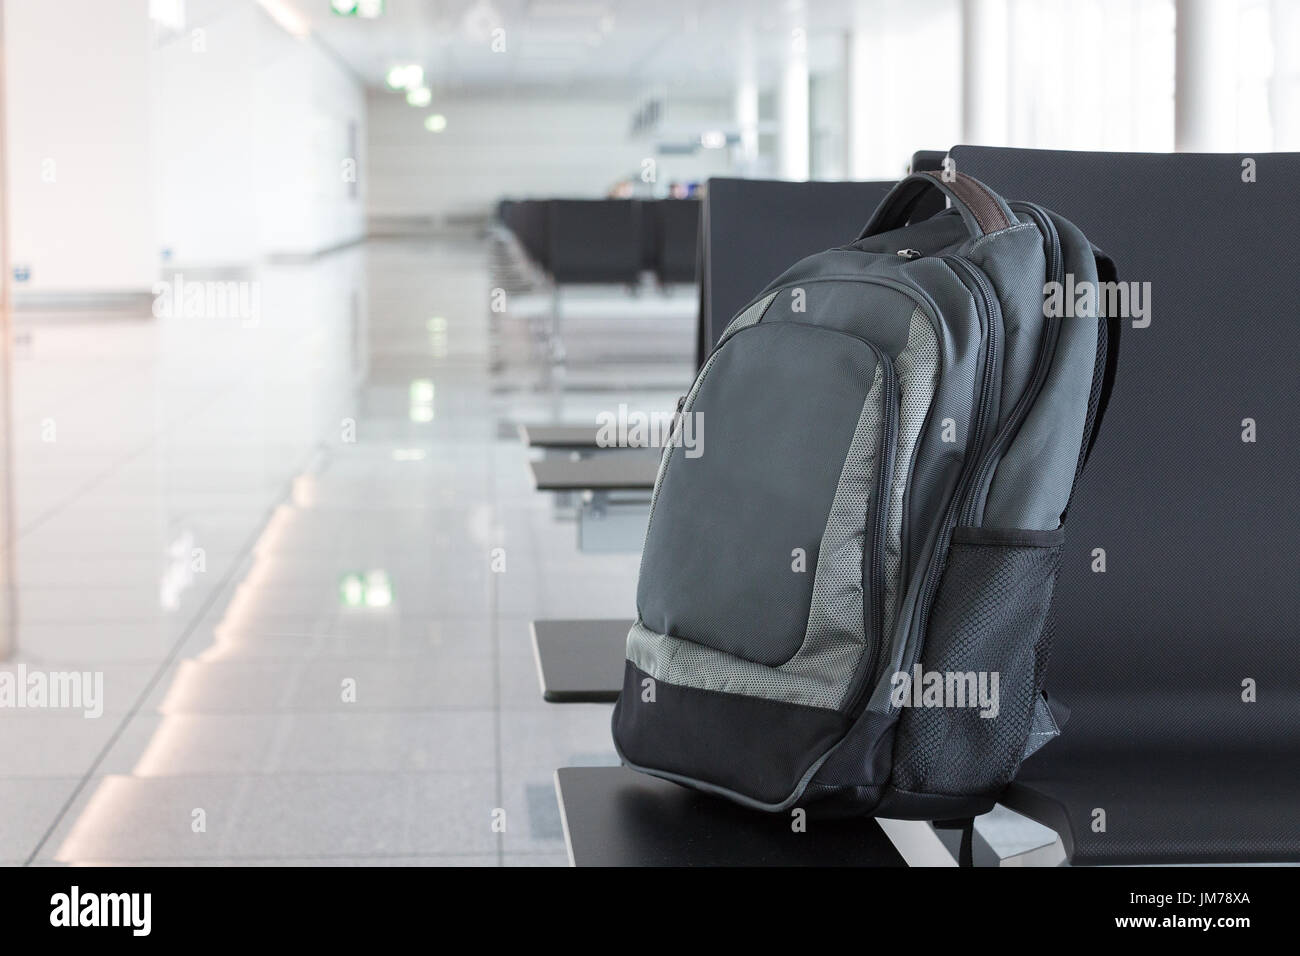 Abandoned, unattended cabin backpack on chair at the gates area of an airport. Stock Photo